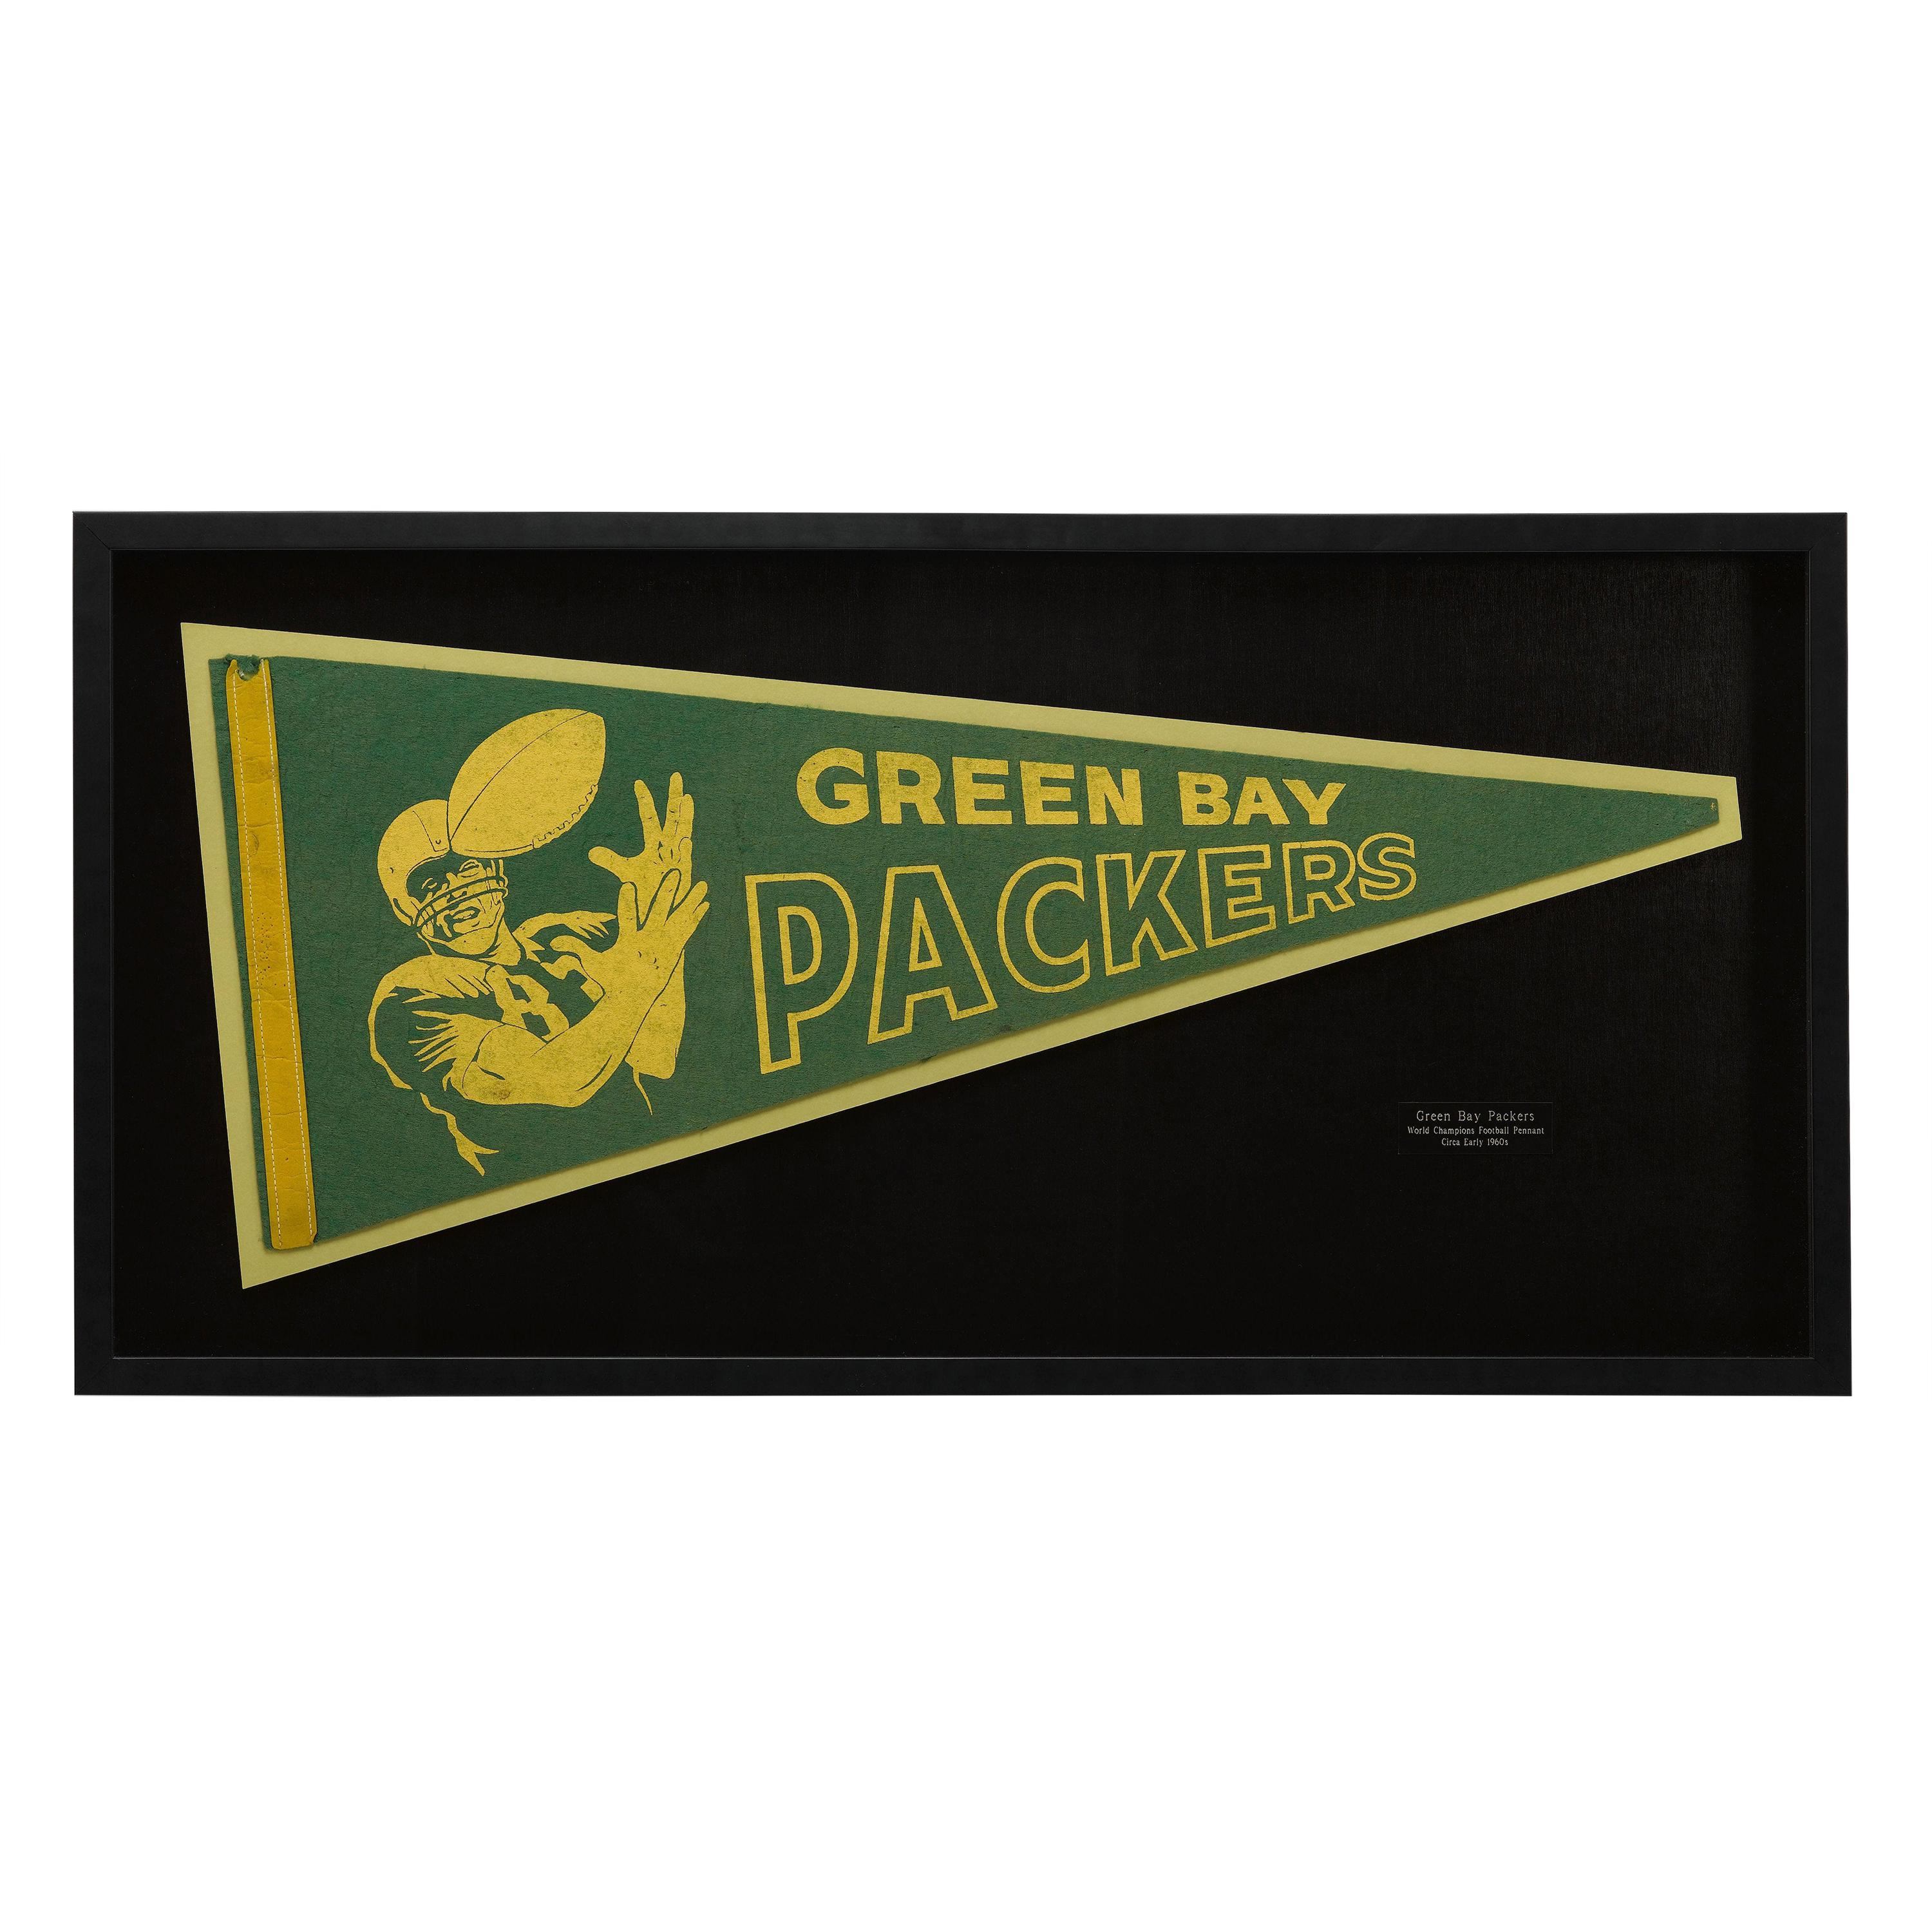 Green Bay Packers Super Bowl Champions Pennant, 1967